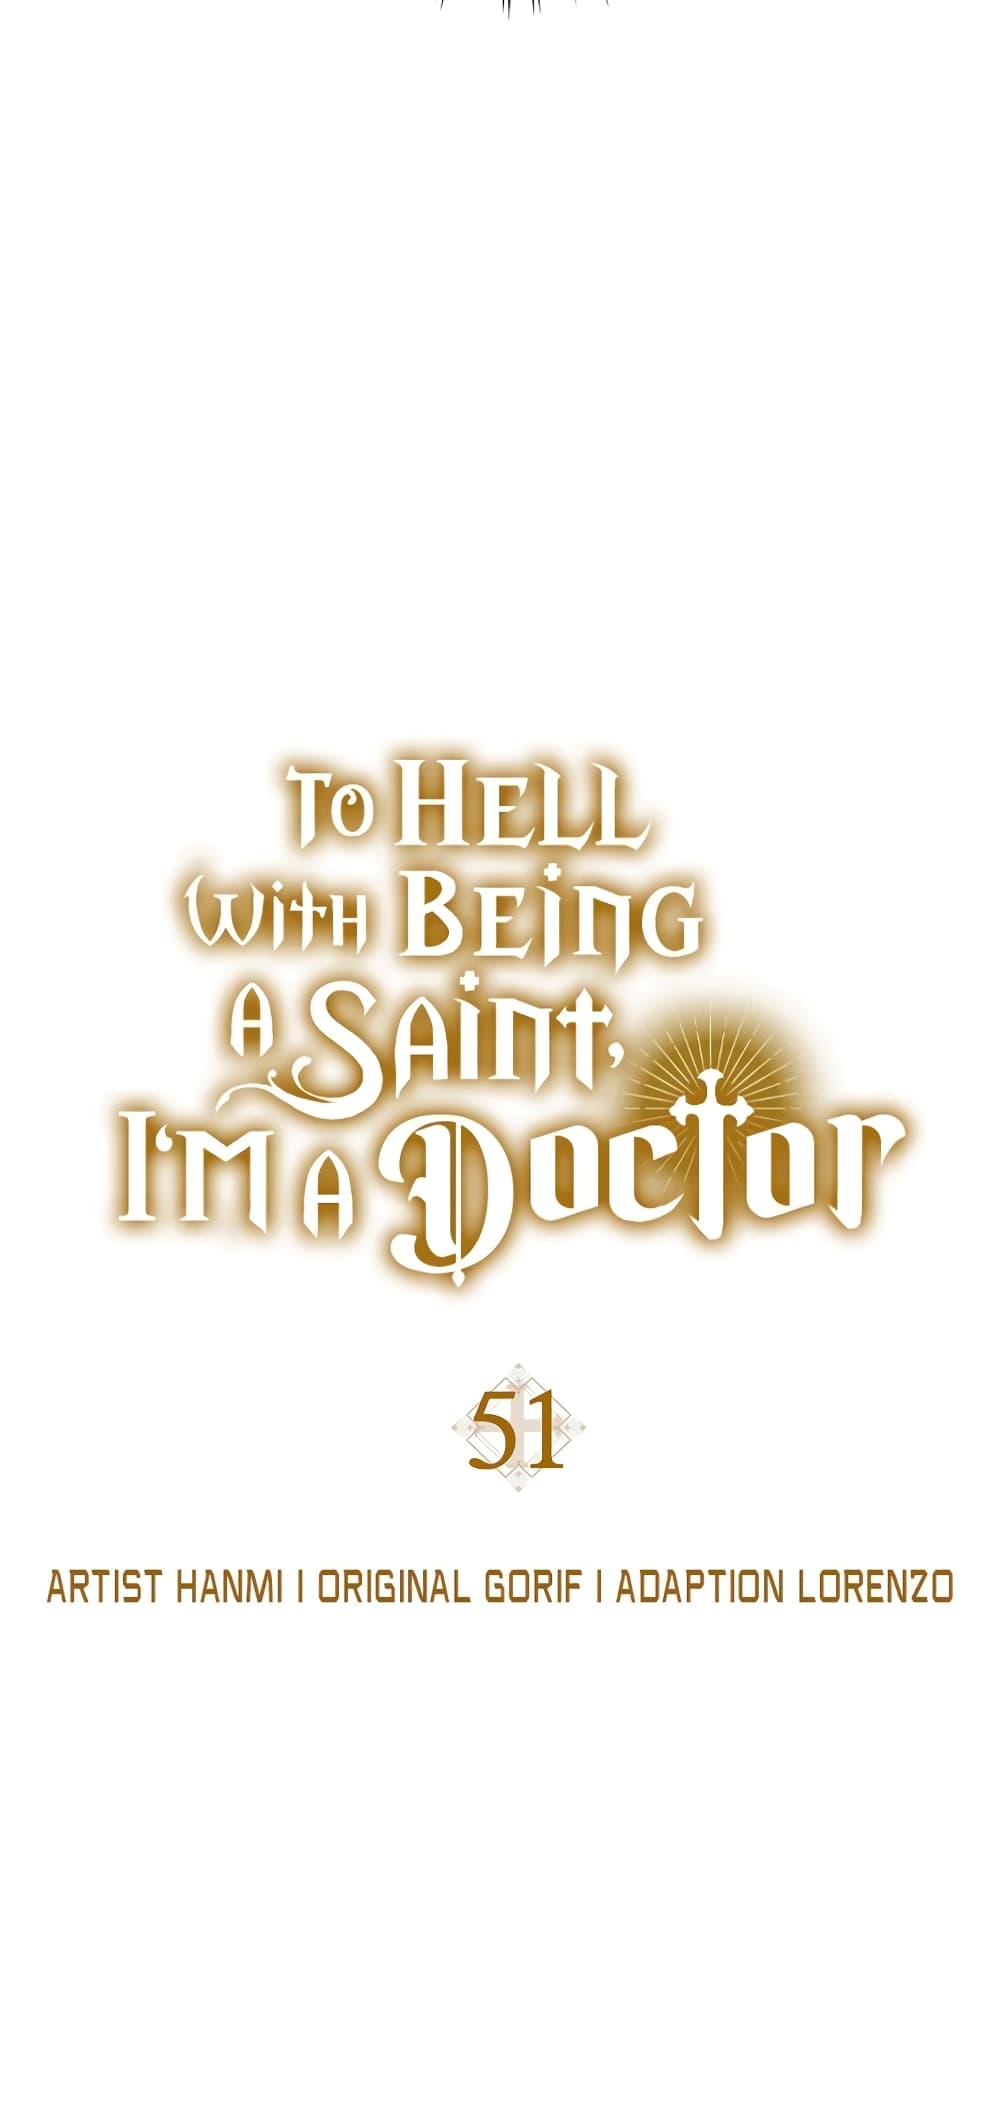 To Hell With Being A Saint, I’m A Doctor 51-51